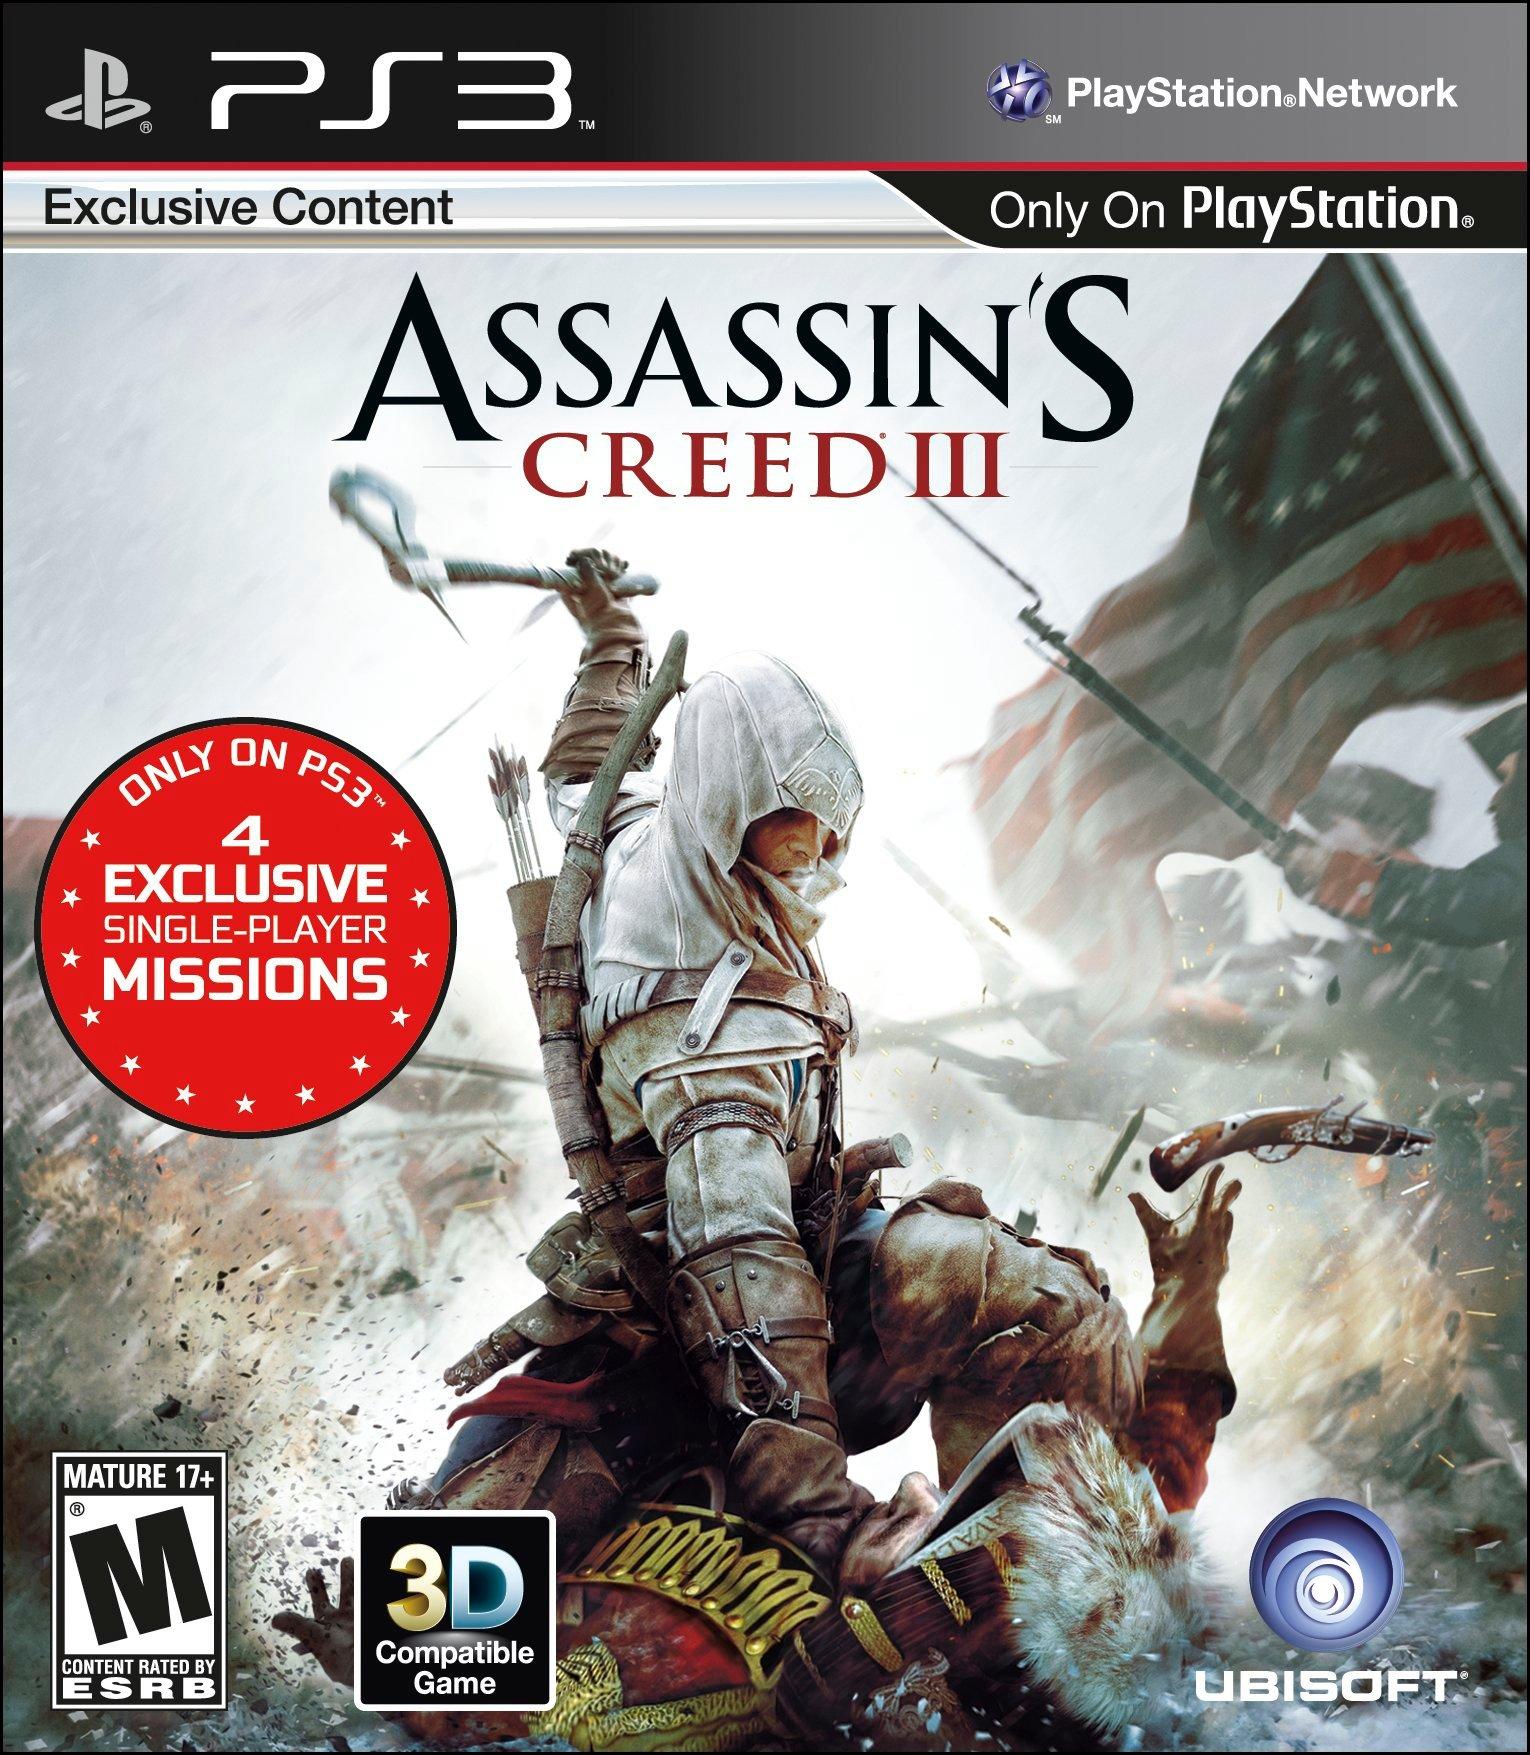 assassin's creed 3 ps4 price